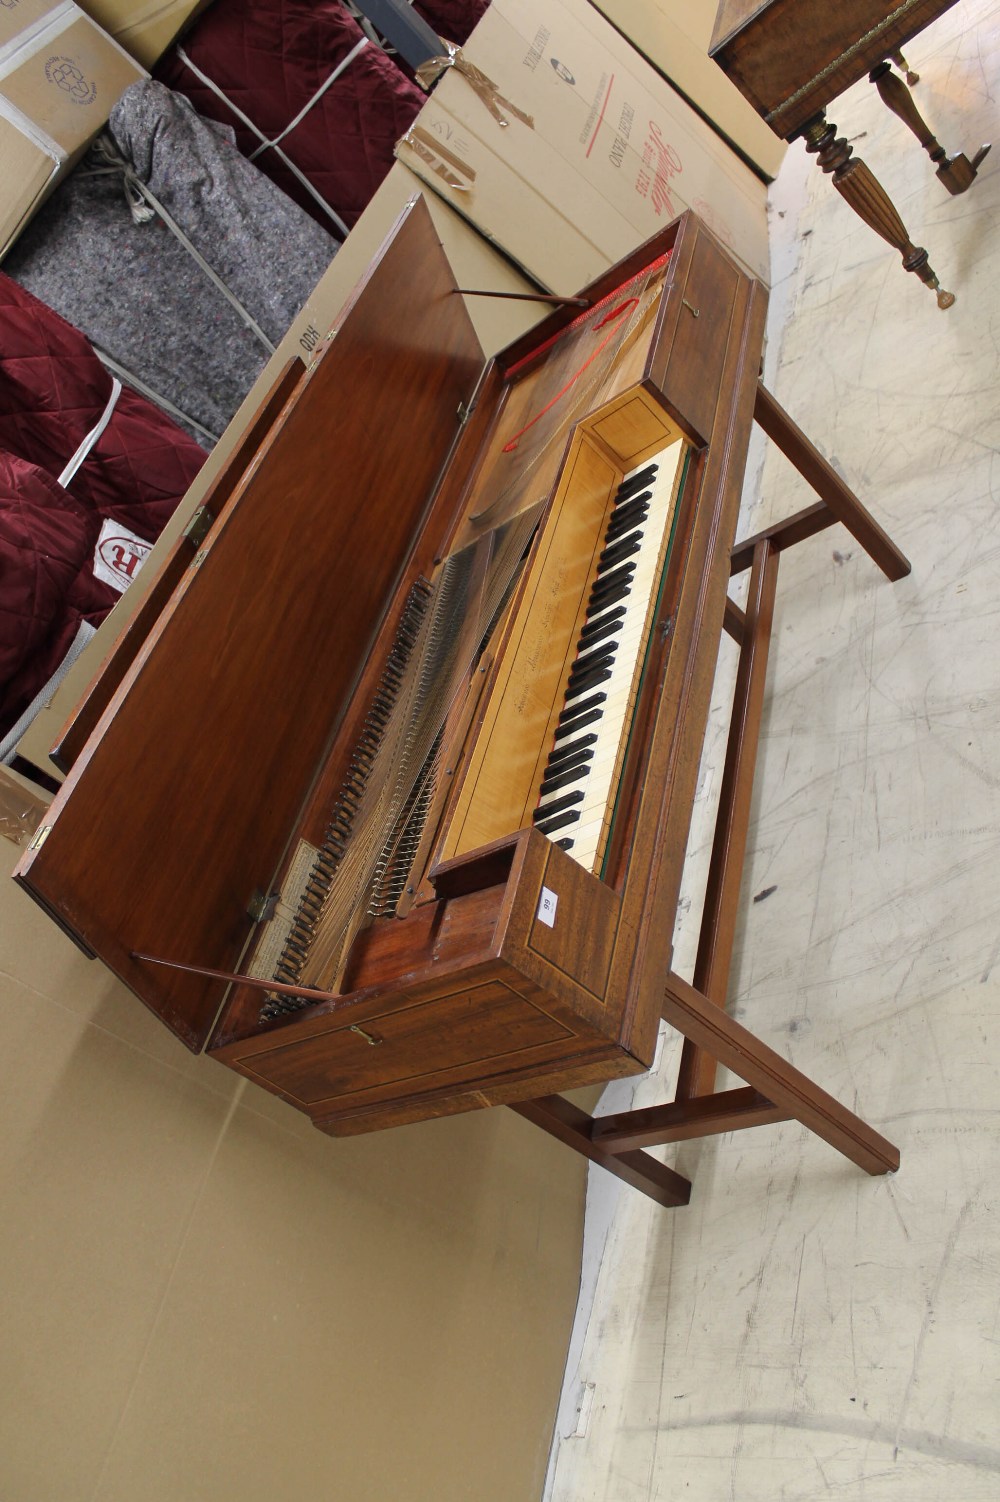 Broadwood (c1787) A square piano in a mahogany case with ebony stringing, - Image 6 of 7